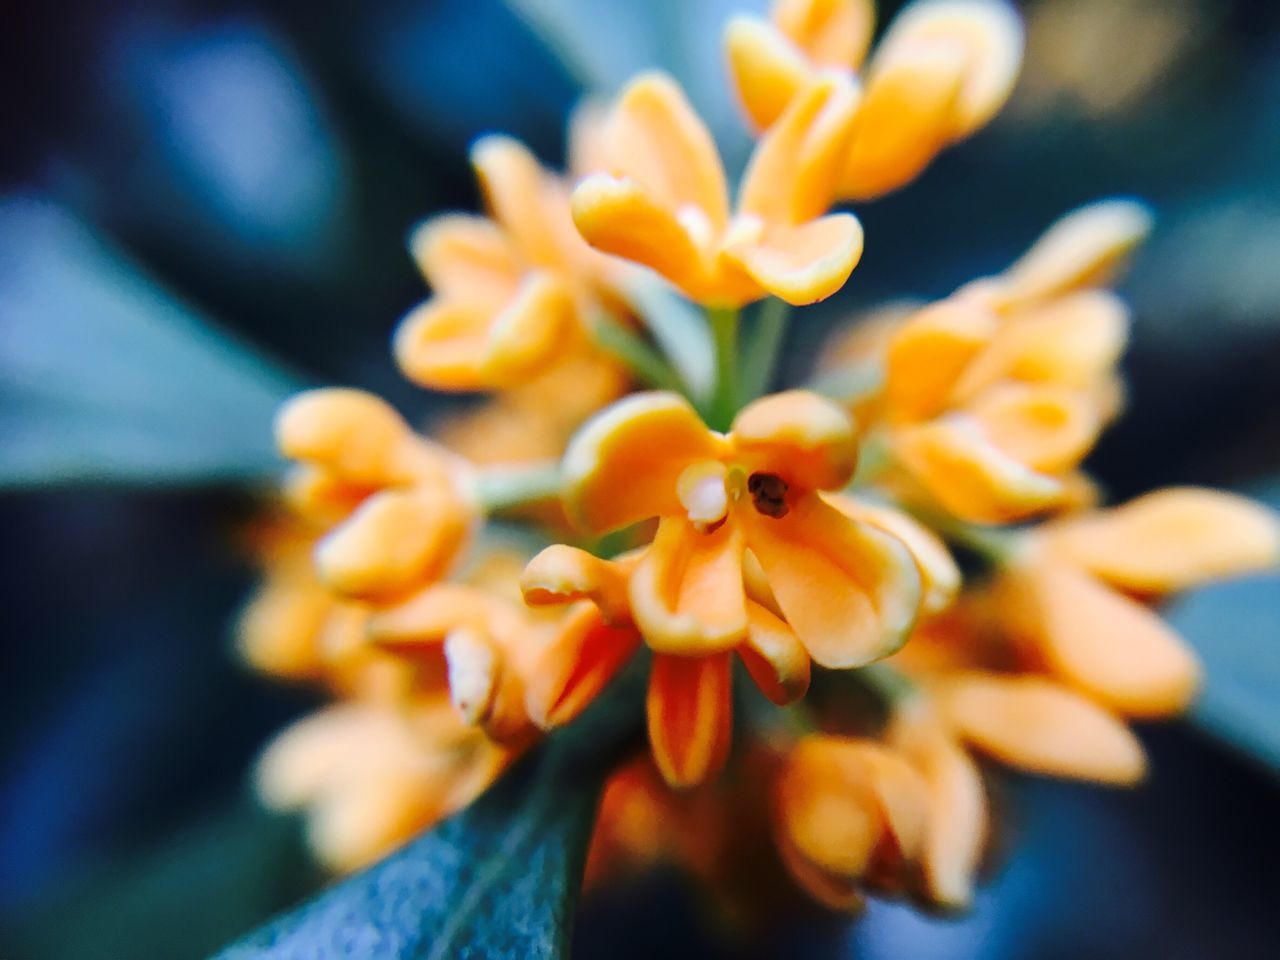 flower, freshness, petal, fragility, growth, close-up, beauty in nature, flower head, focus on foreground, nature, selective focus, yellow, springtime, orange color, in bloom, day, blossom, botany, vibrant color, blooming, outdoors, yellow color, no people, pollen